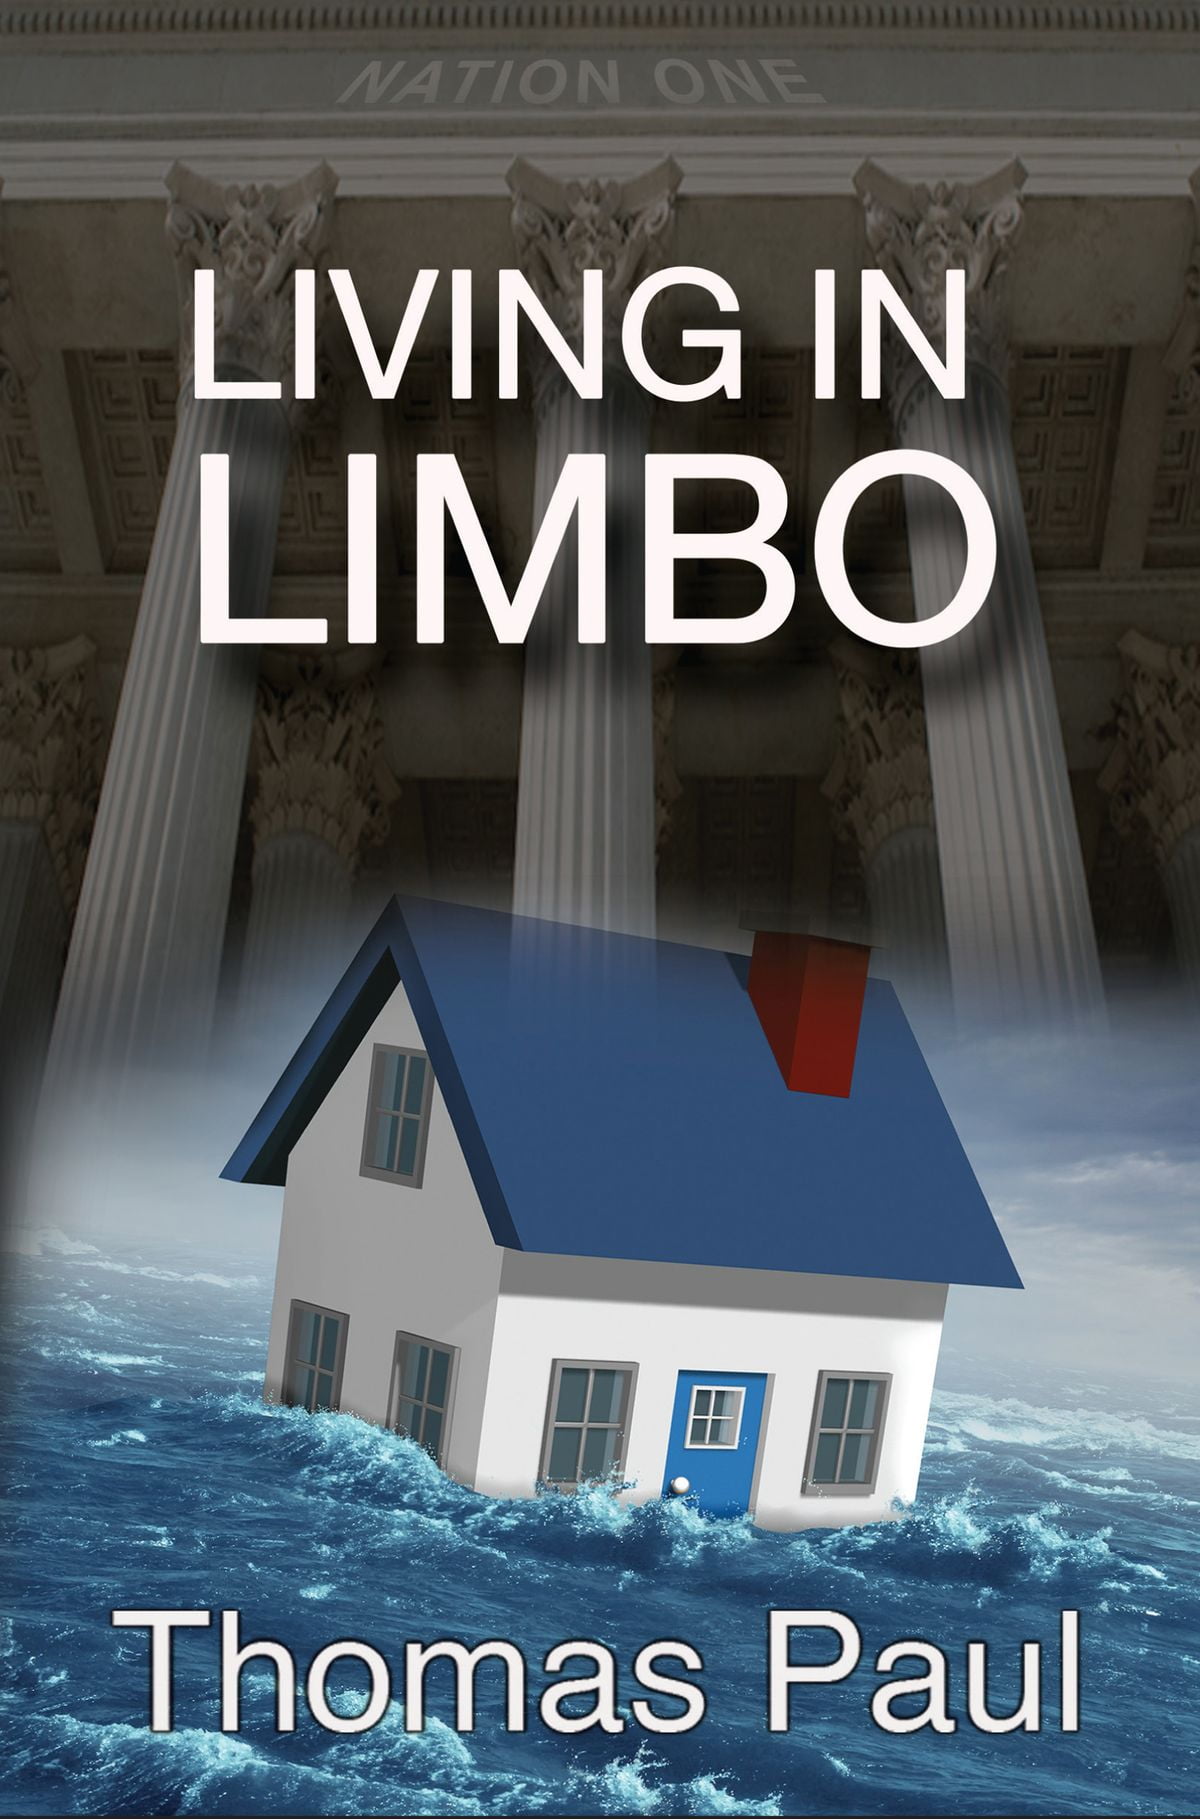 lives in limbo